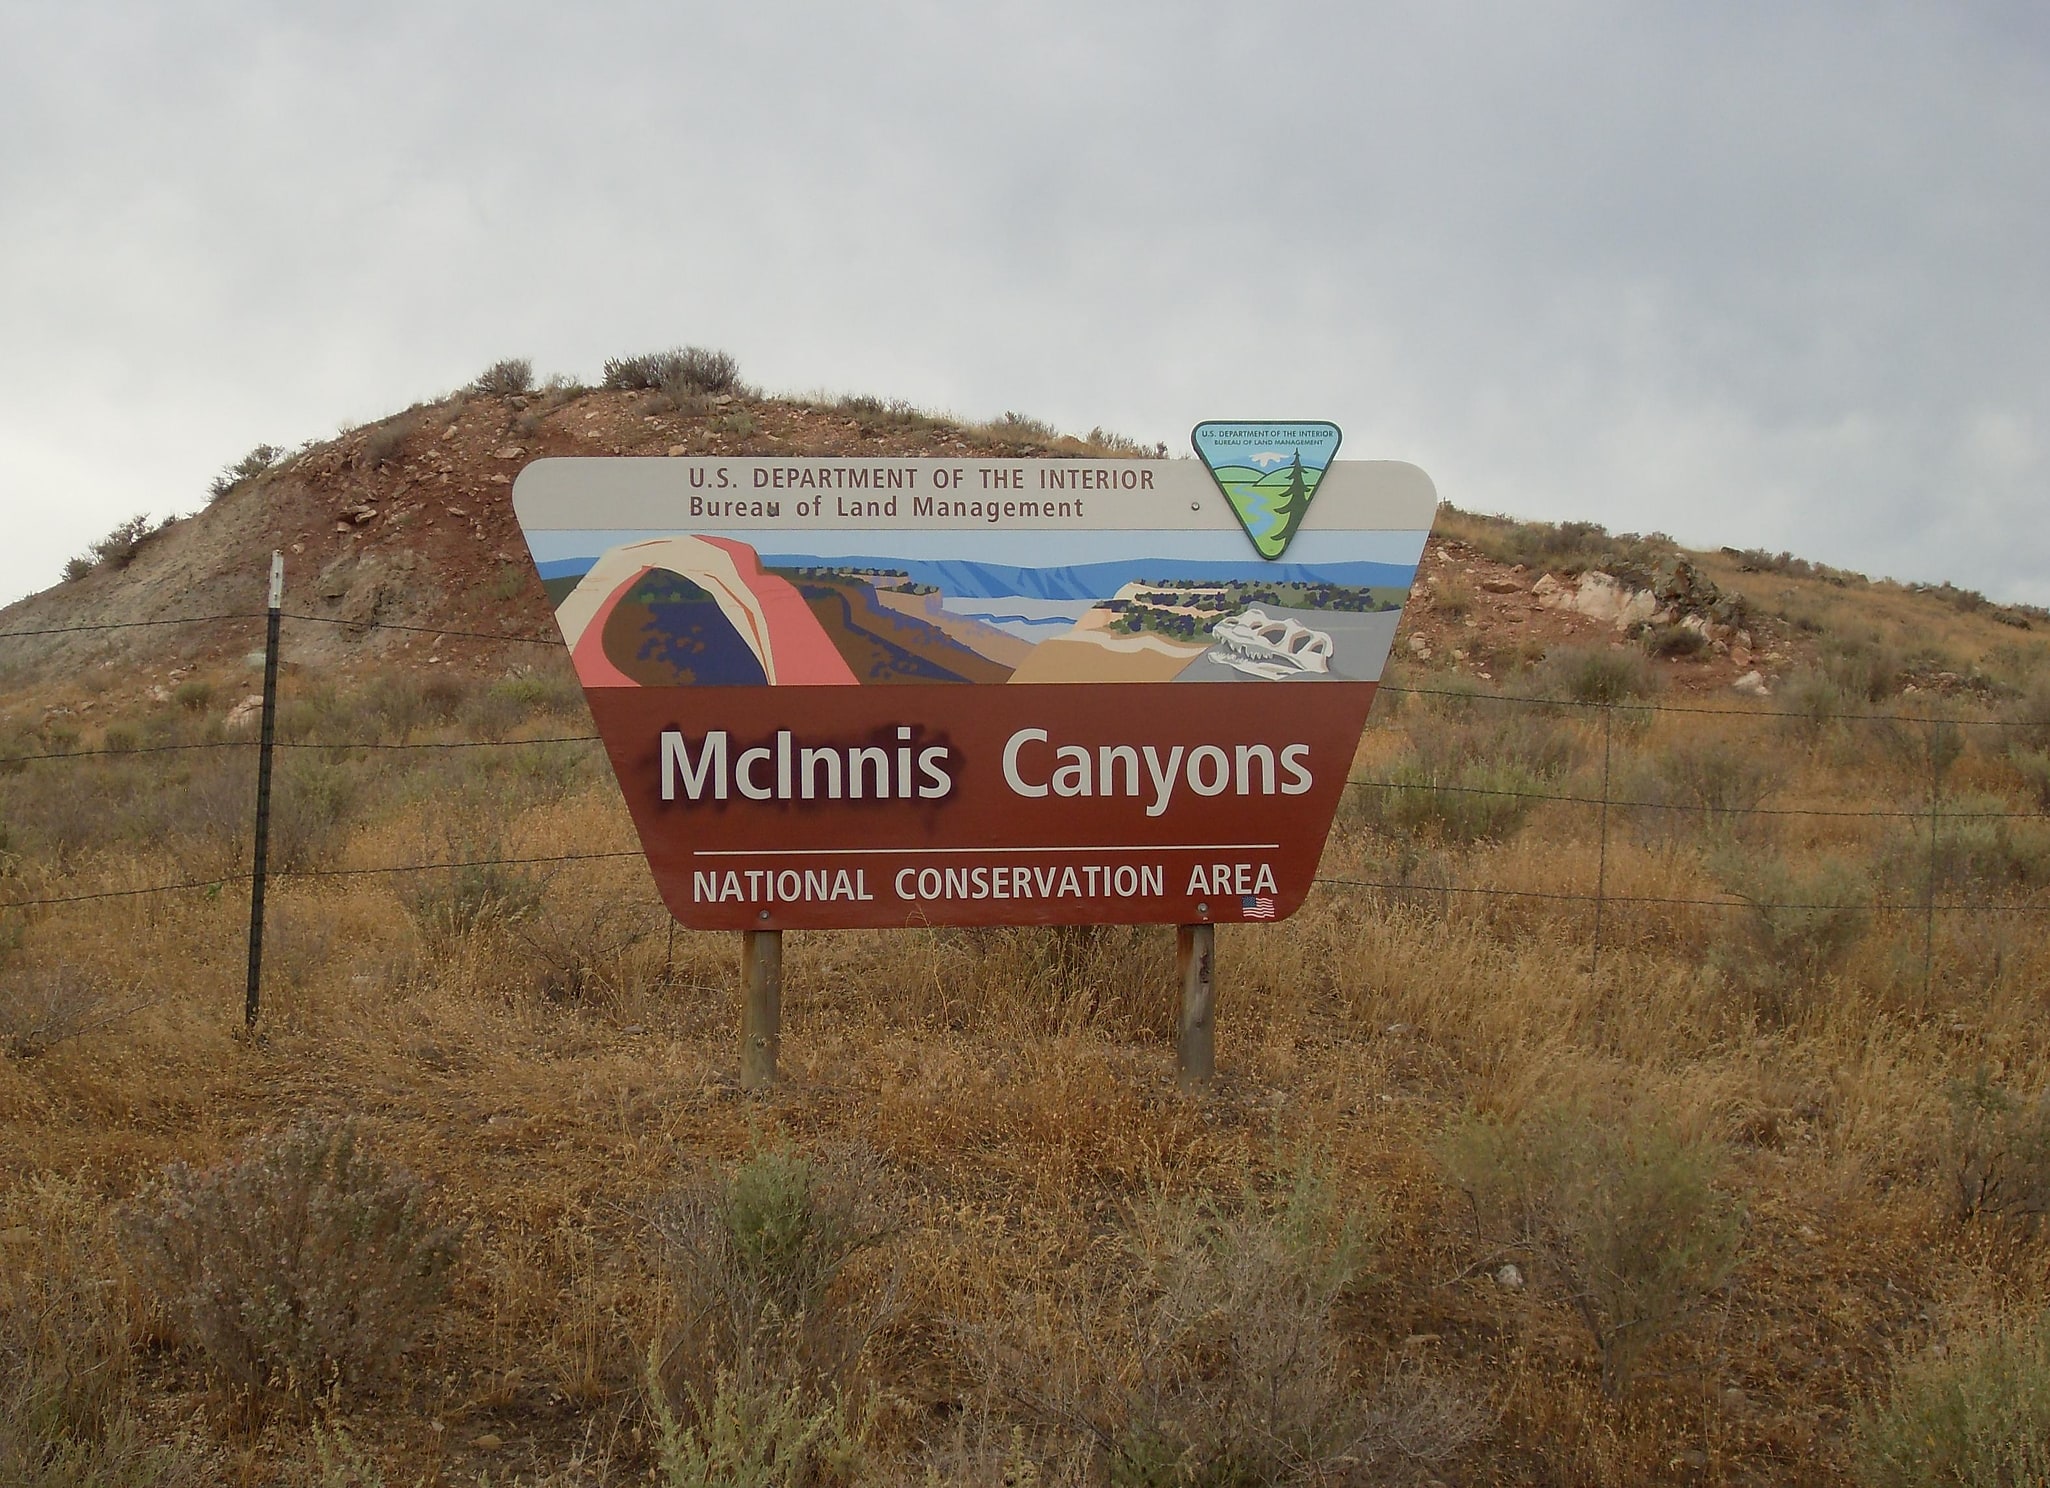 McInnis Canyons National Conservation Area, United States